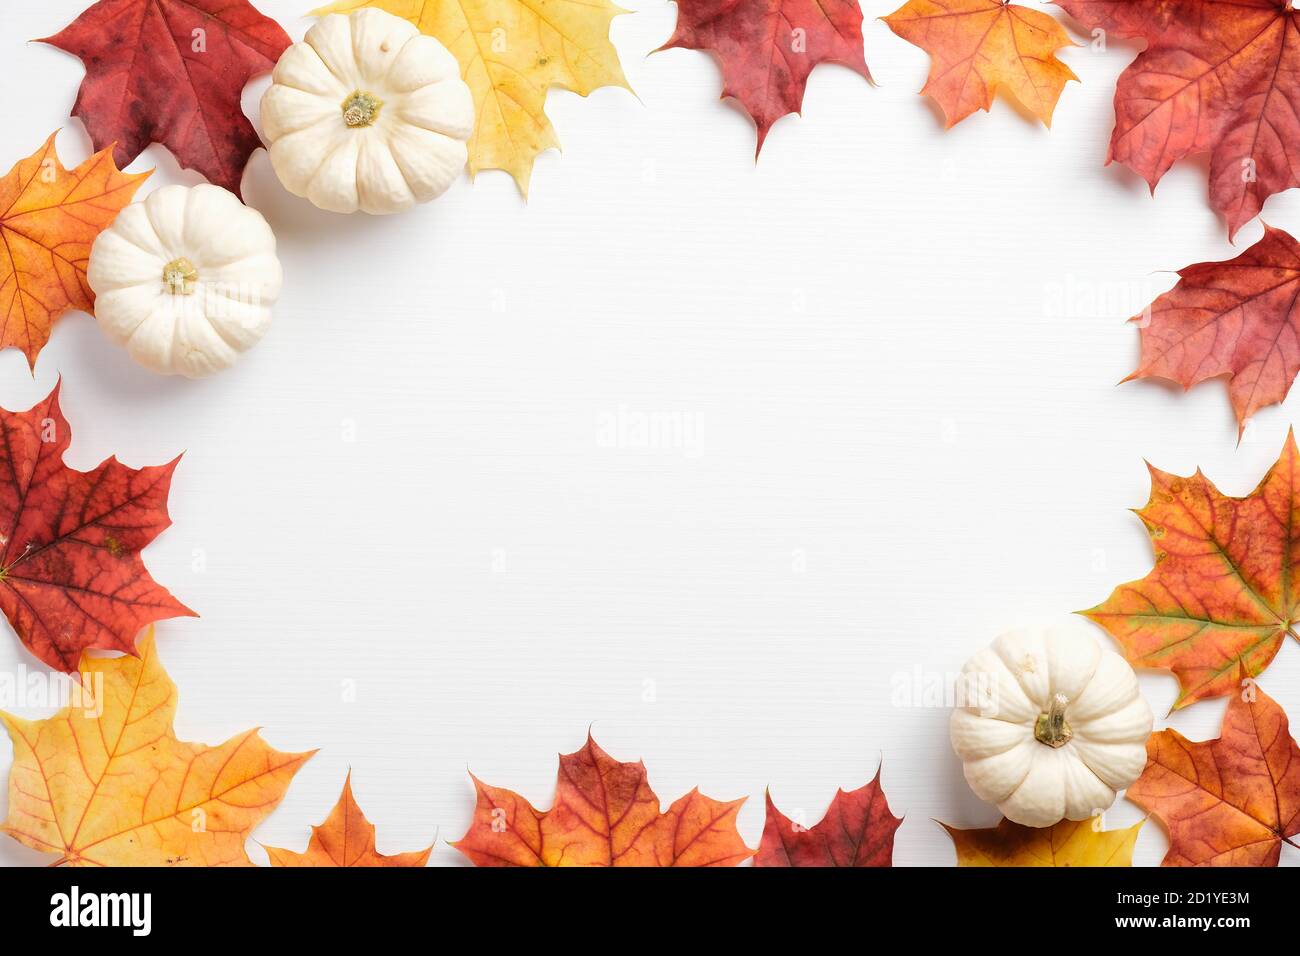 Autumn leaves and pumpkins border frame on white table. Seasonal background.  Autumn fall, thanksgiving, harvest concept. Flat lay, top view Stock Photo  - Alamy